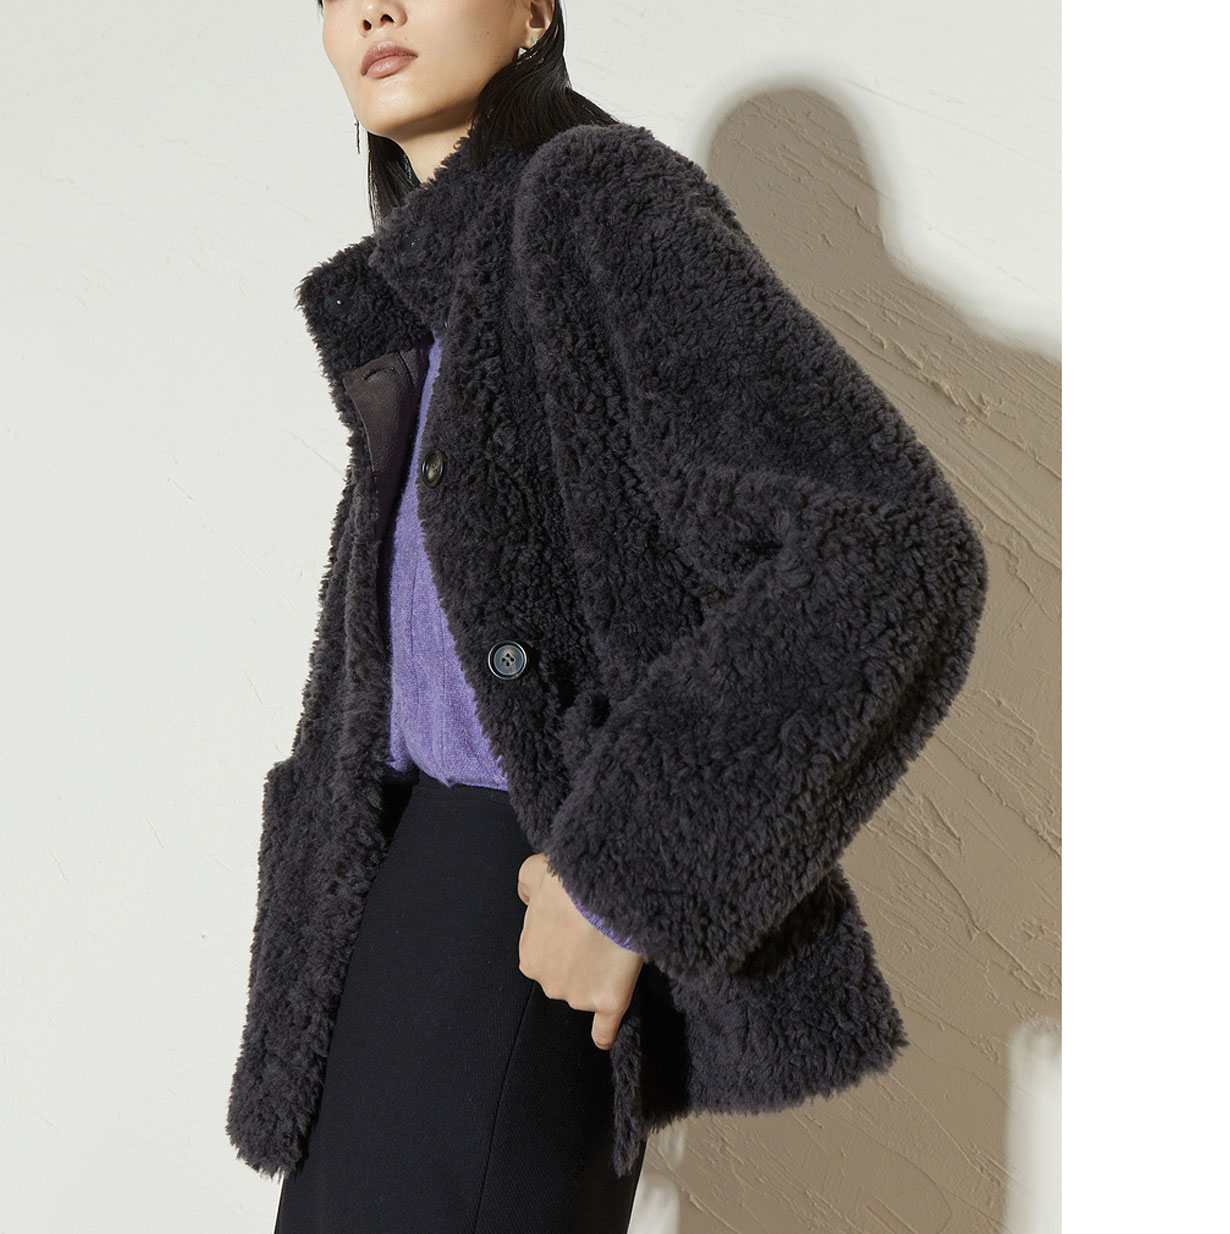 Best Wool Coats Melbourne Suppliers –  22T036 Shearing Fur Coat for Women Winter Warm over Coat  – MeWell